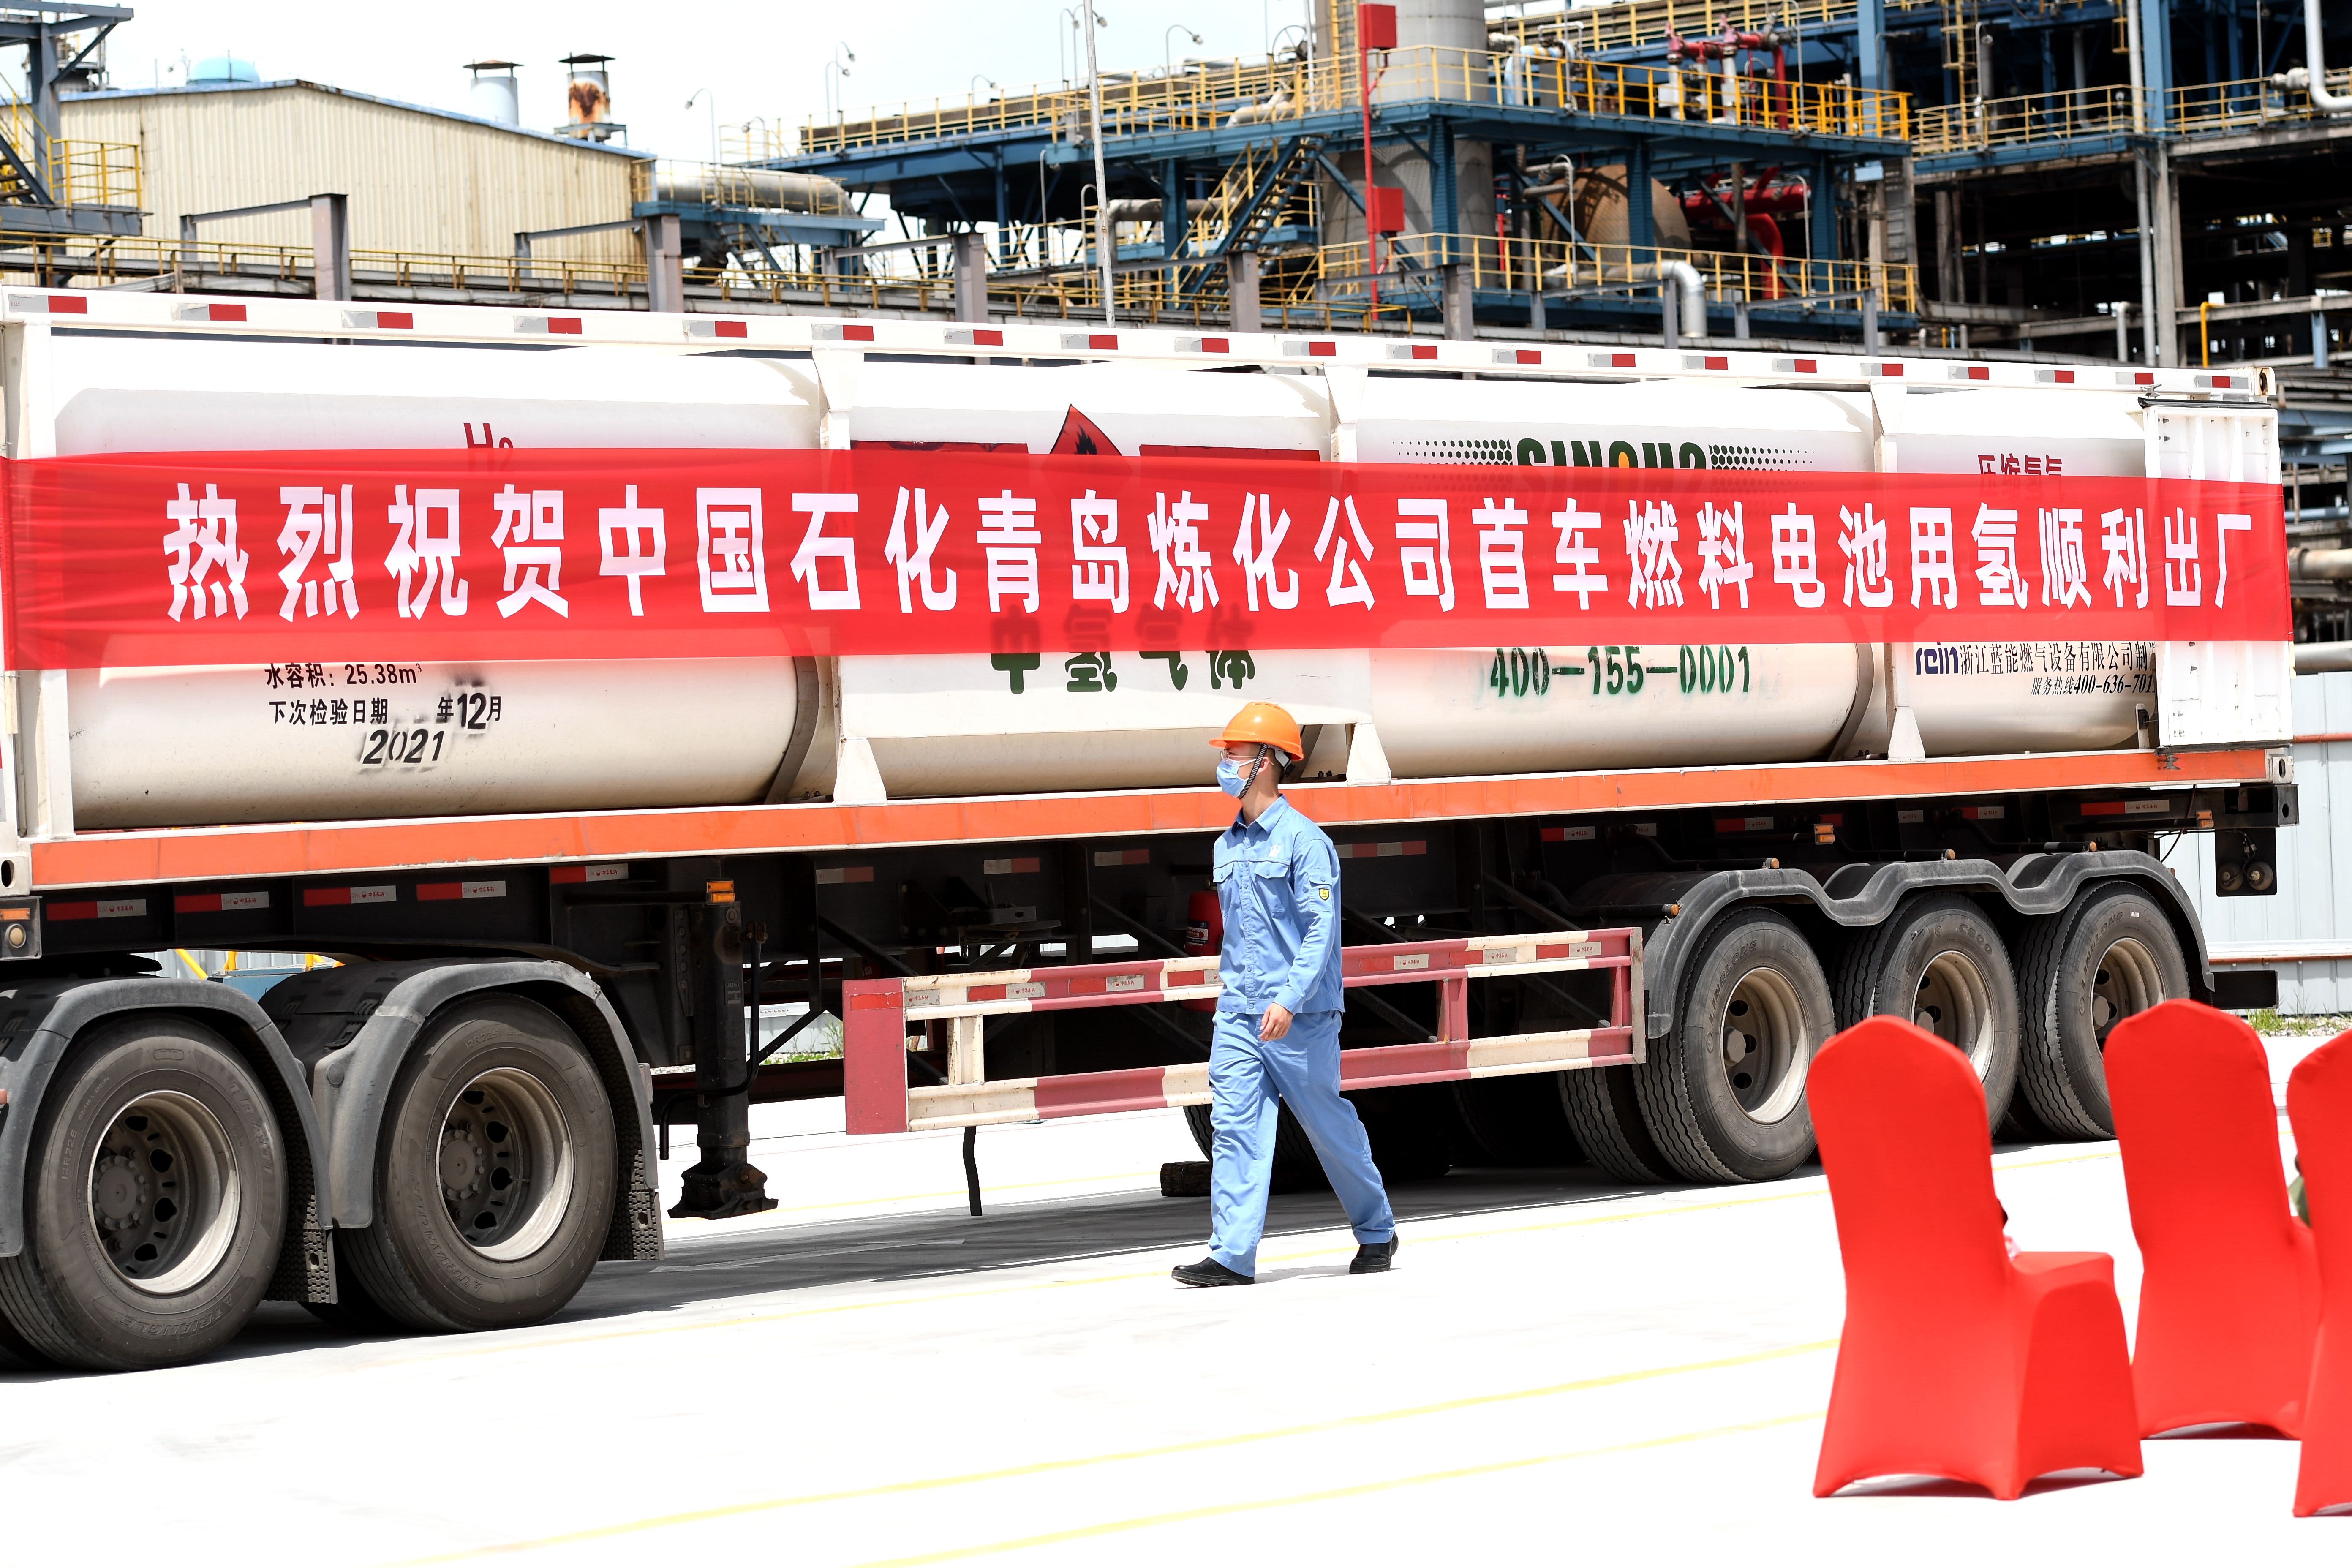 Fuel-cell vehicles are set for big gains in China's commercial truck market, JPM..